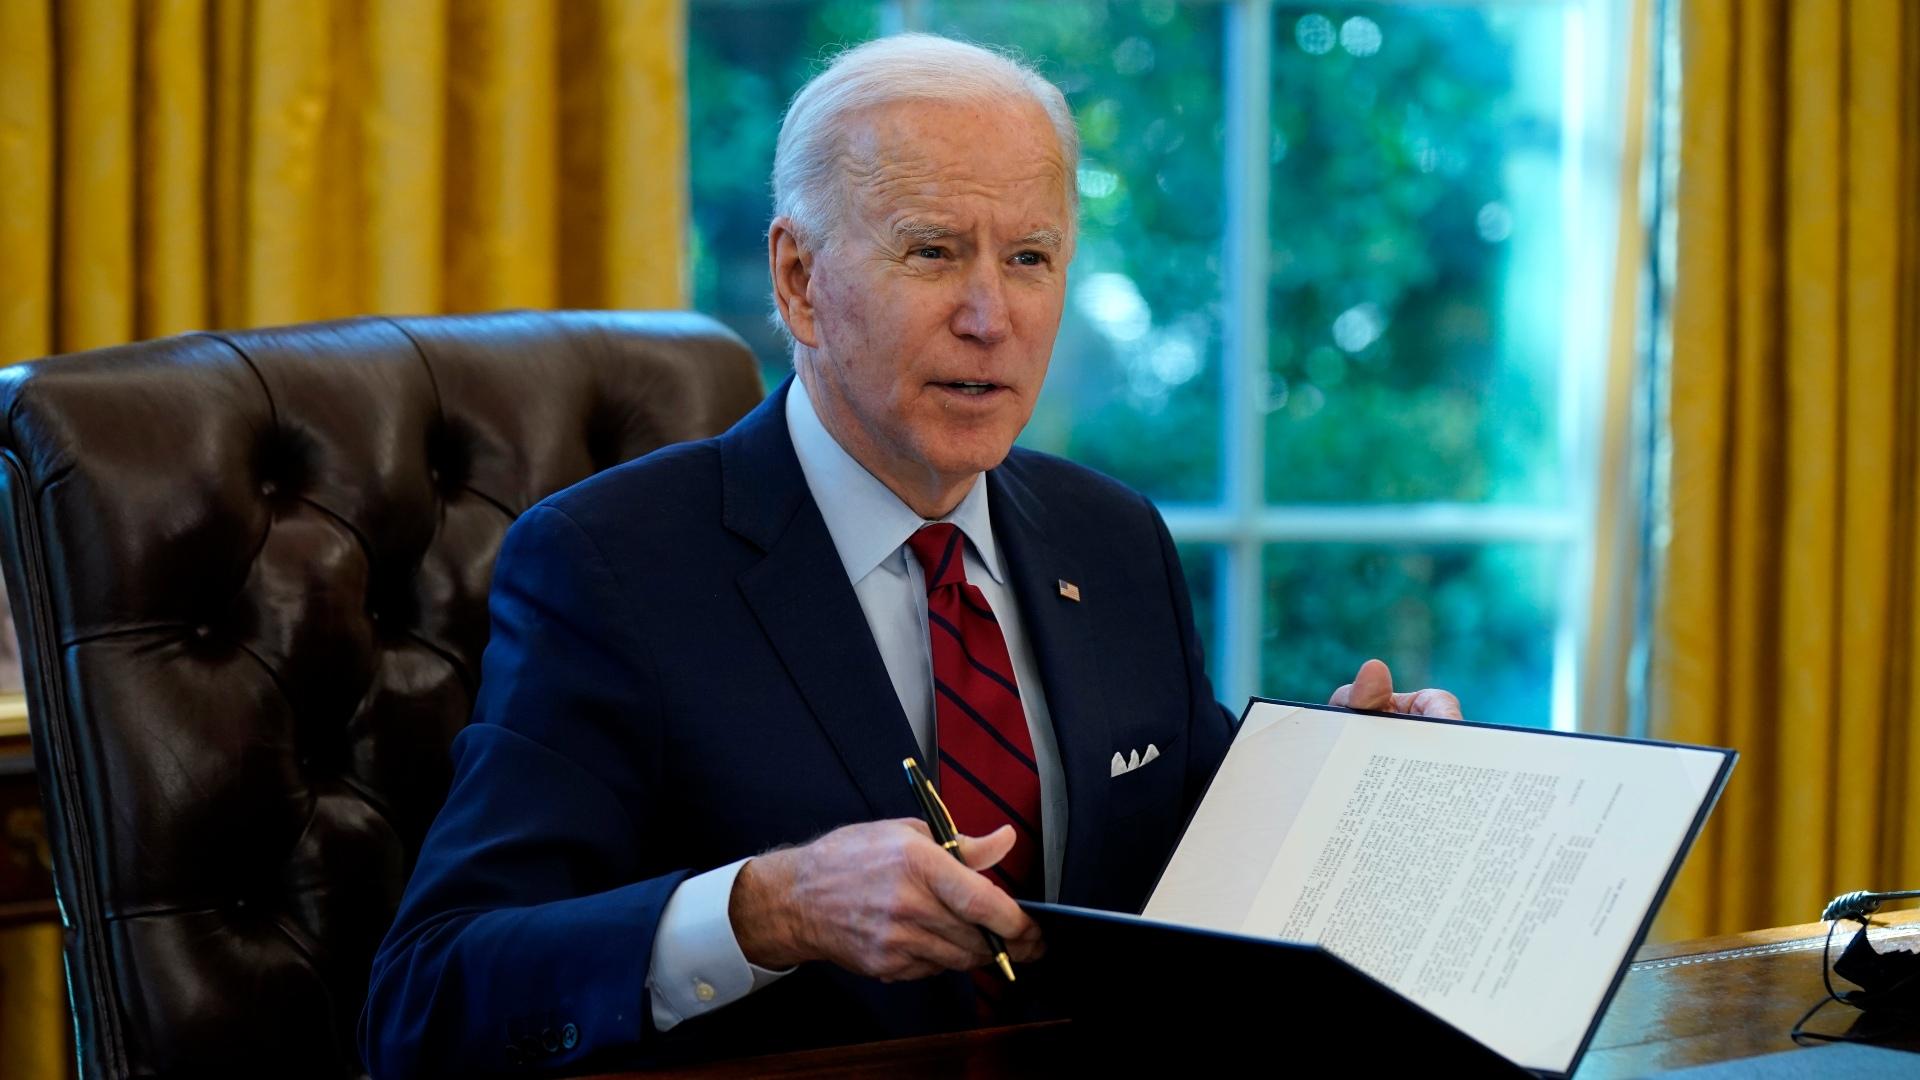 President Joe Biden signs a series of executive orders on health care, in the Oval Office of the White House, Thursday, Jan. 28, 2021, in Washington. (AP Photo / Evan Vucci)